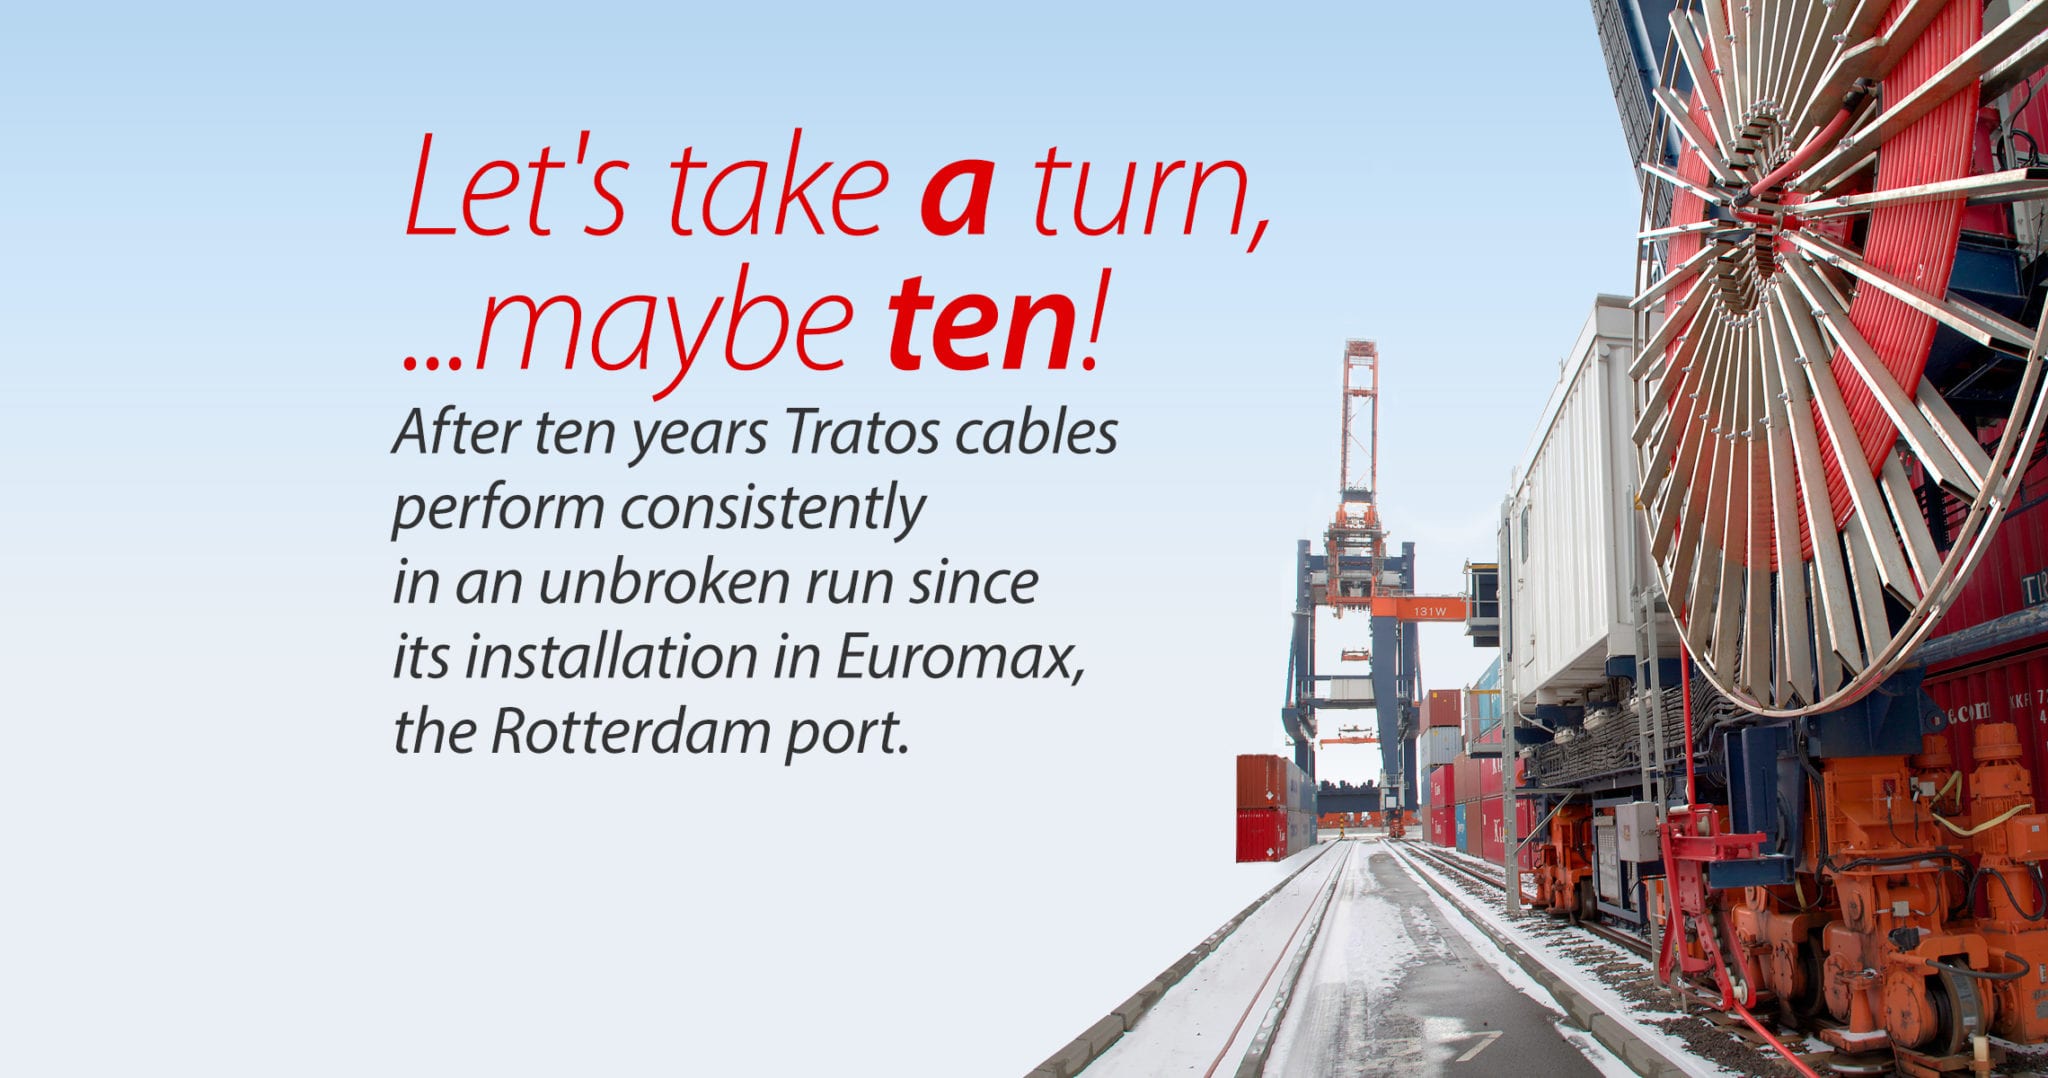 Tratos is celebrating 10 years continuous running in Euromax